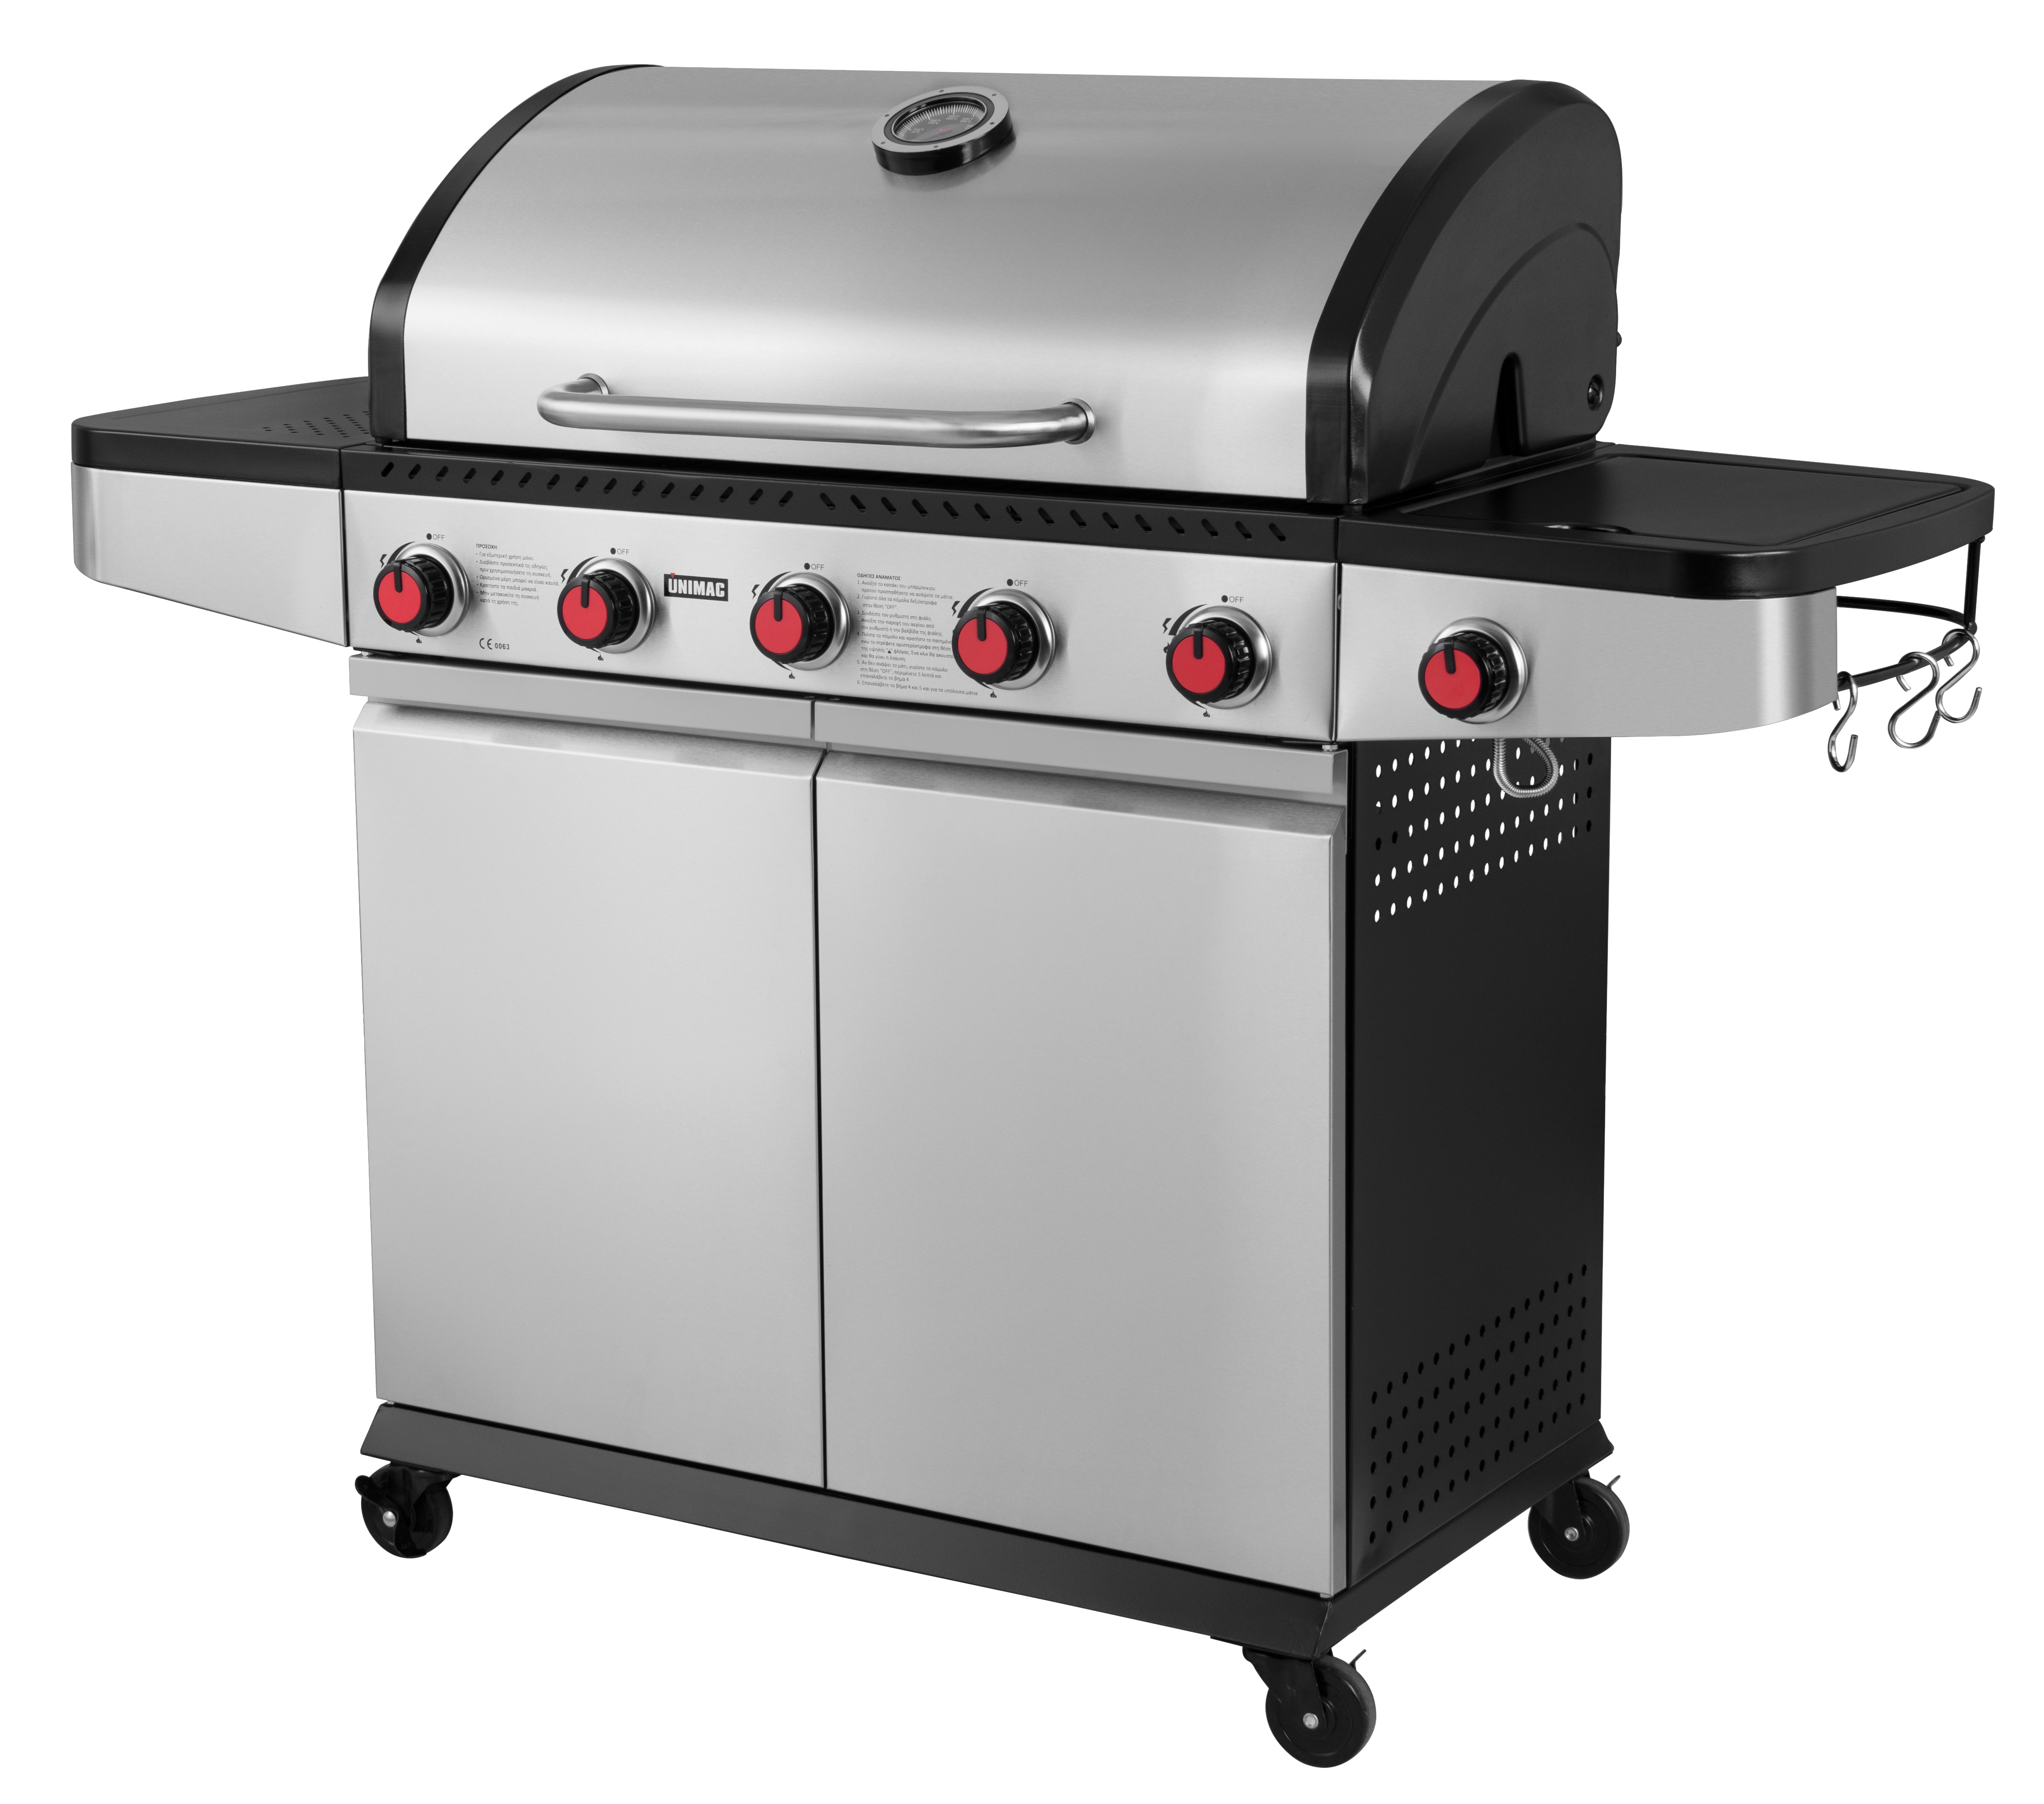 Gas Barbeque Premium INOX with 4 Burners and a side cob Unimac - 4